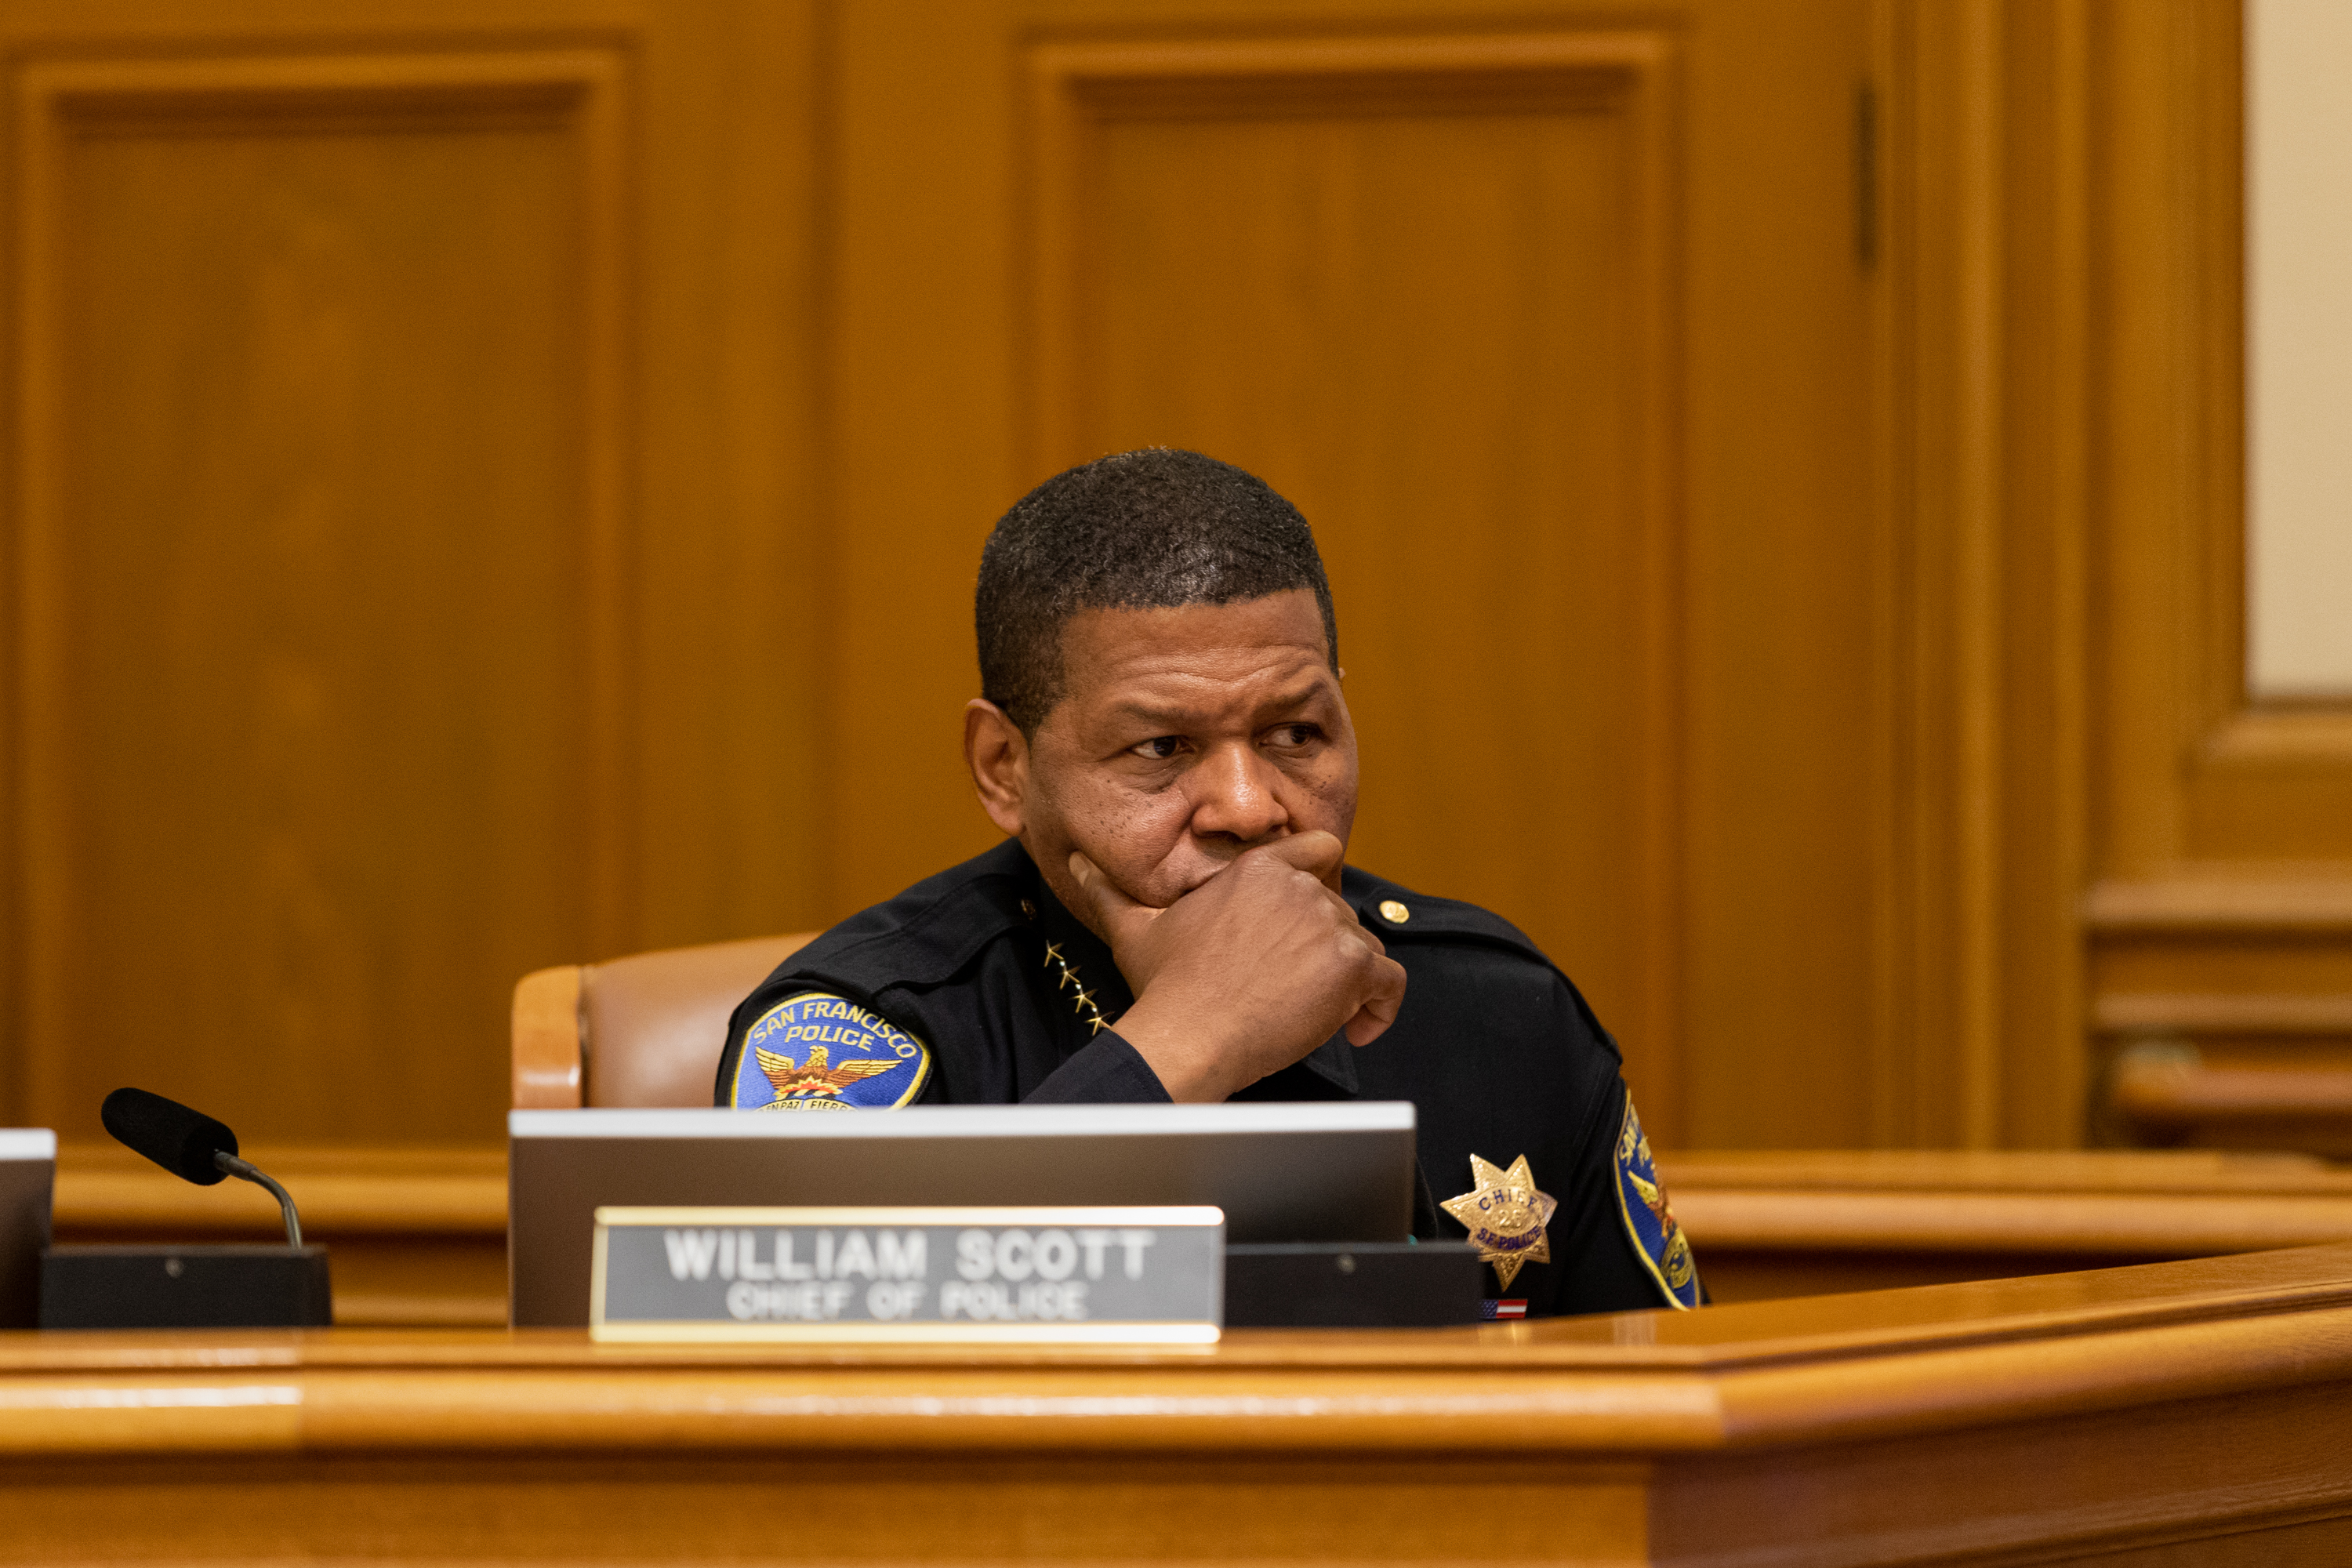 A man in a police uniform sits thoughtfully at a desk with a microphone and a nameplate reading &quot;WILLIAM SCOTT, CHIEF OF POLICE.&quot;